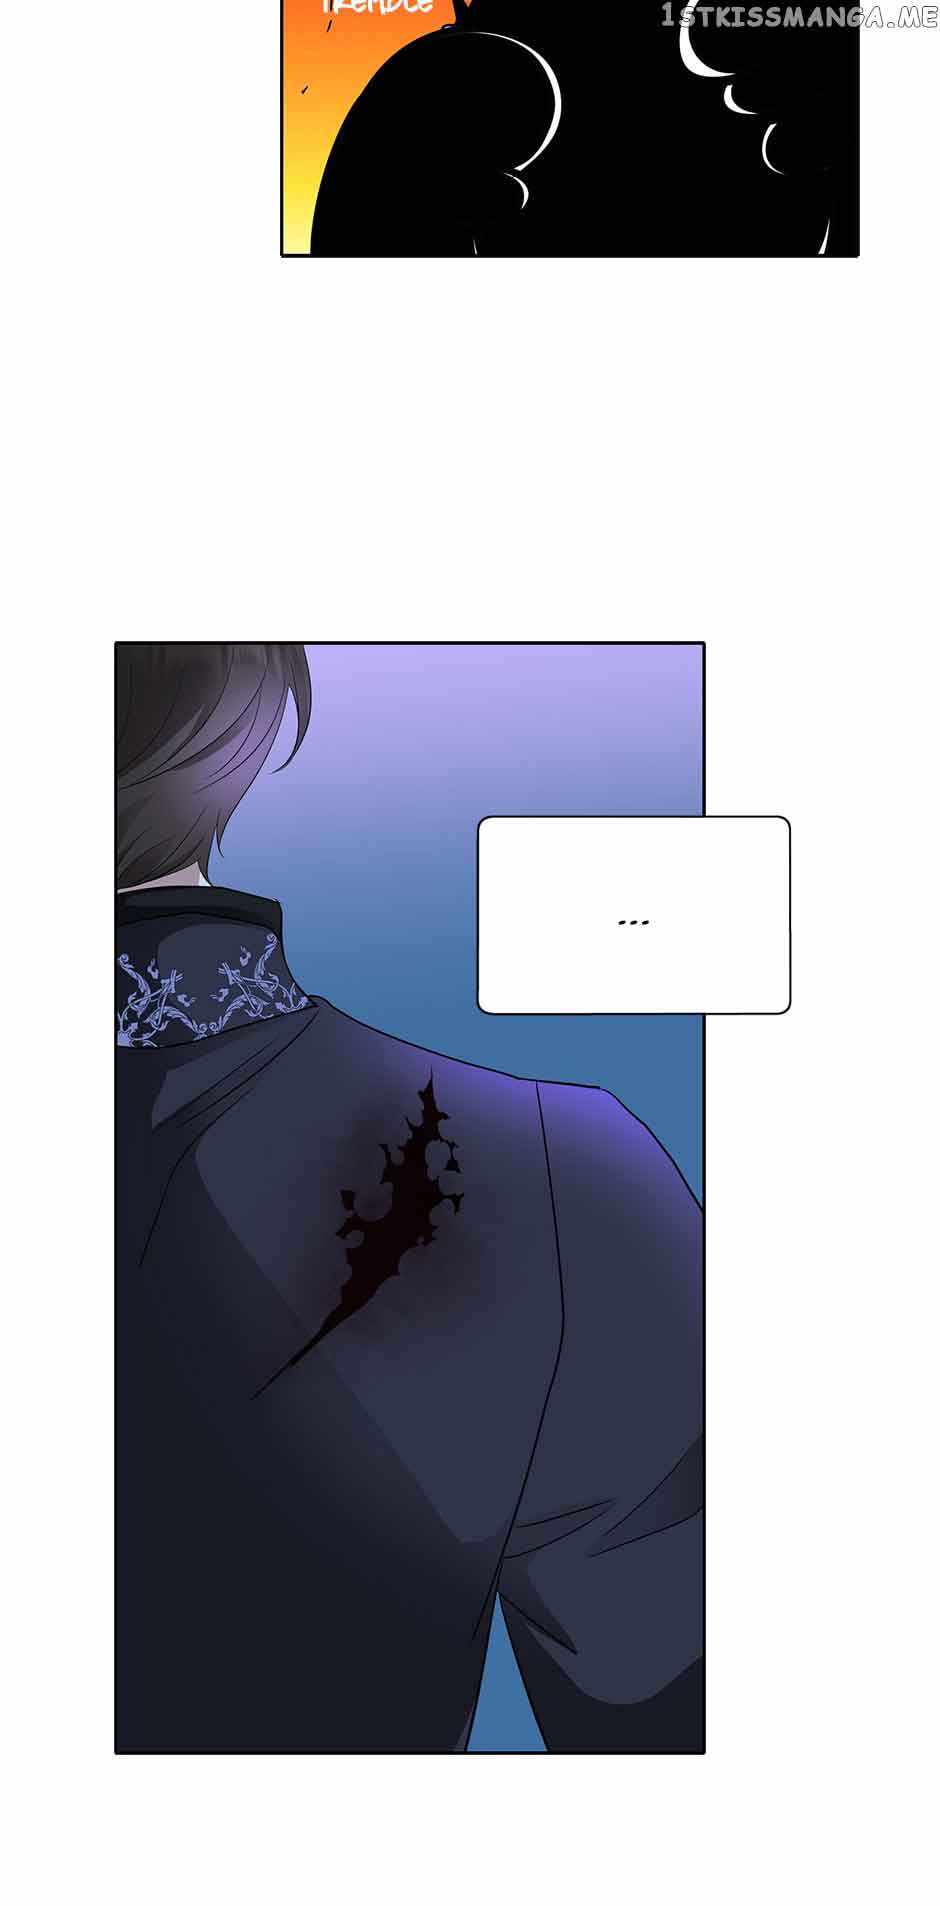 I’m a Killer but I’m Thinking of Living as a Princess Chapter 65-eng-li - Page 13